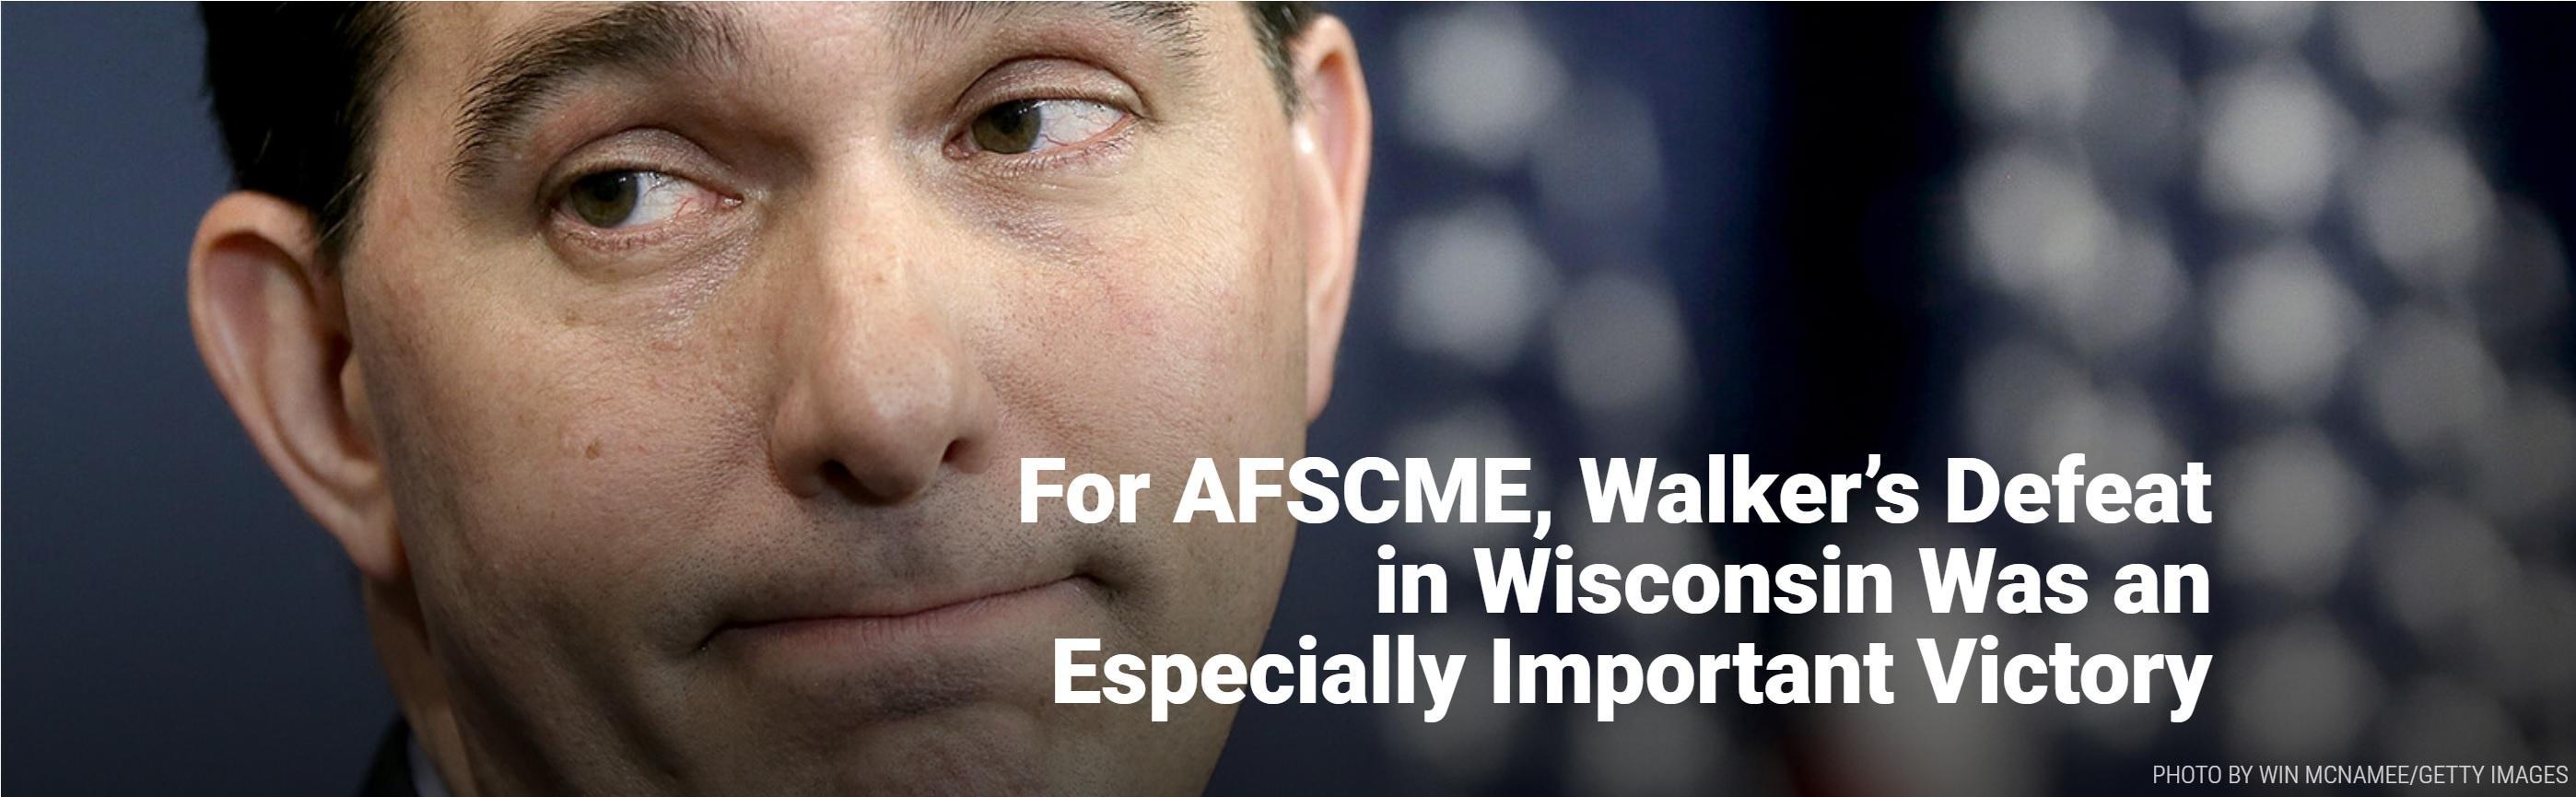 For AFSCME, Walker’s Defeat in Wisconsin Was an Especially Important Victory PHOTO BY WIN MCNAMEE/GETTY IMAGES